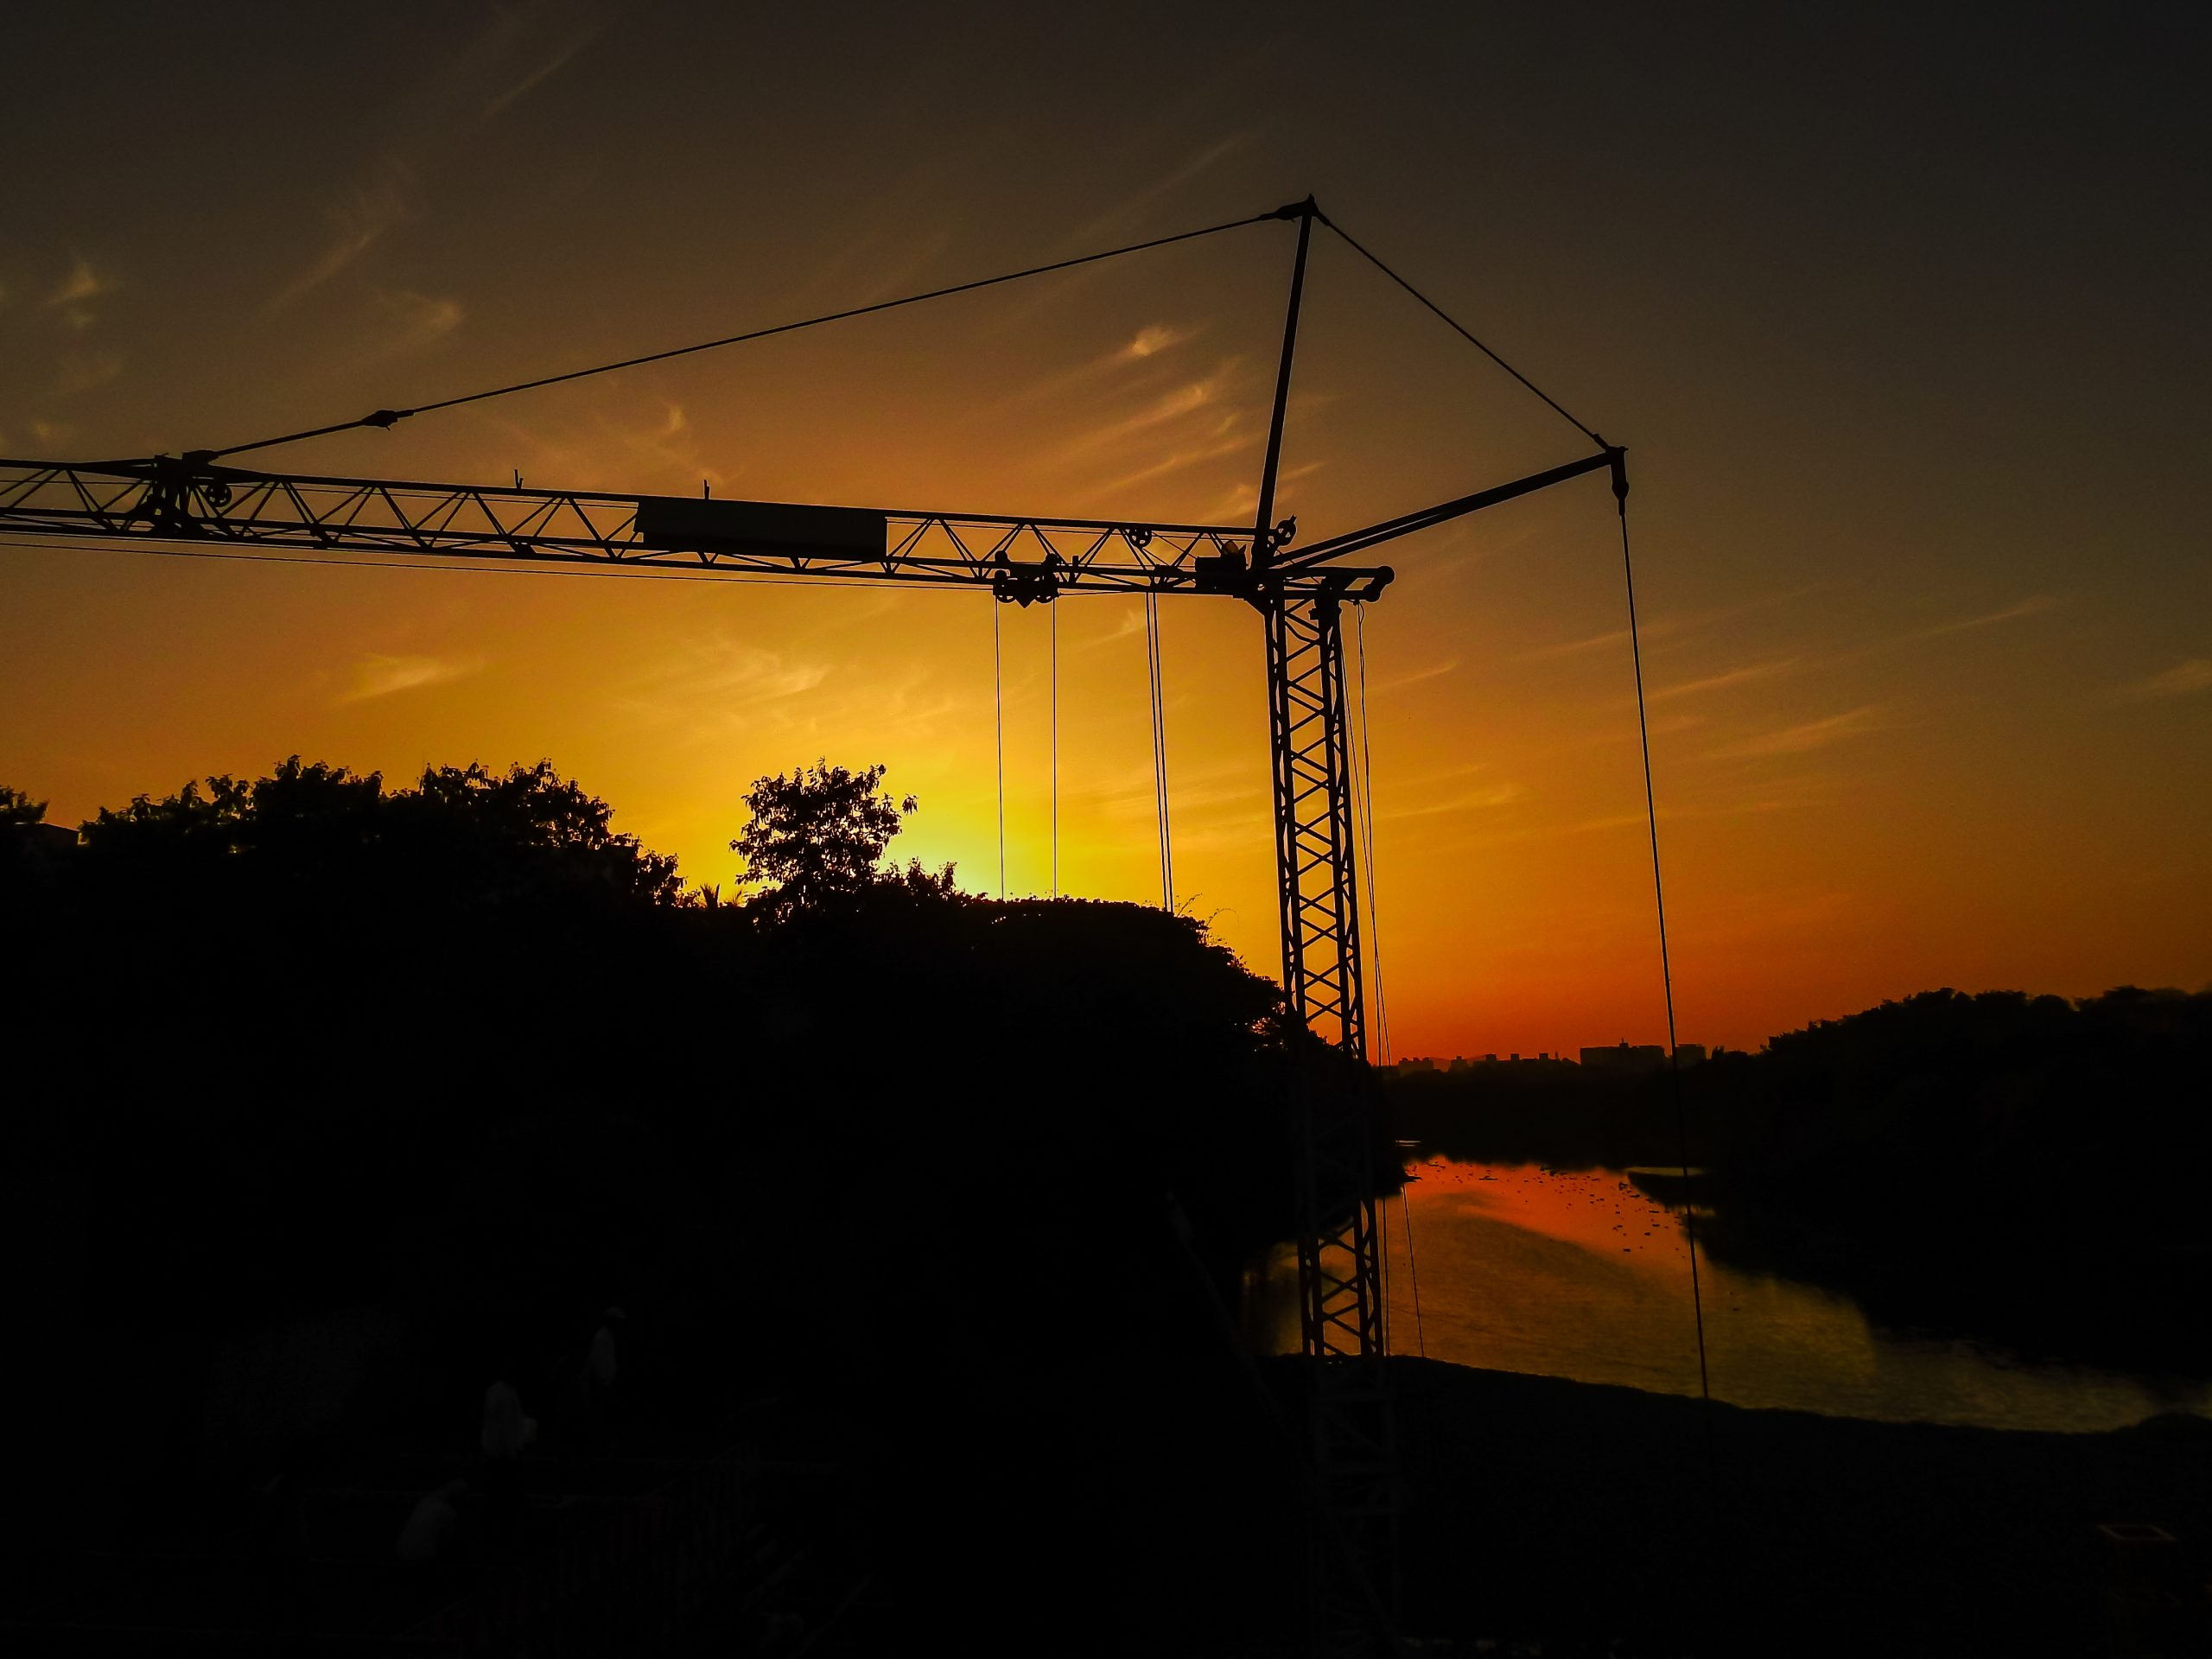 Construction site during sunset